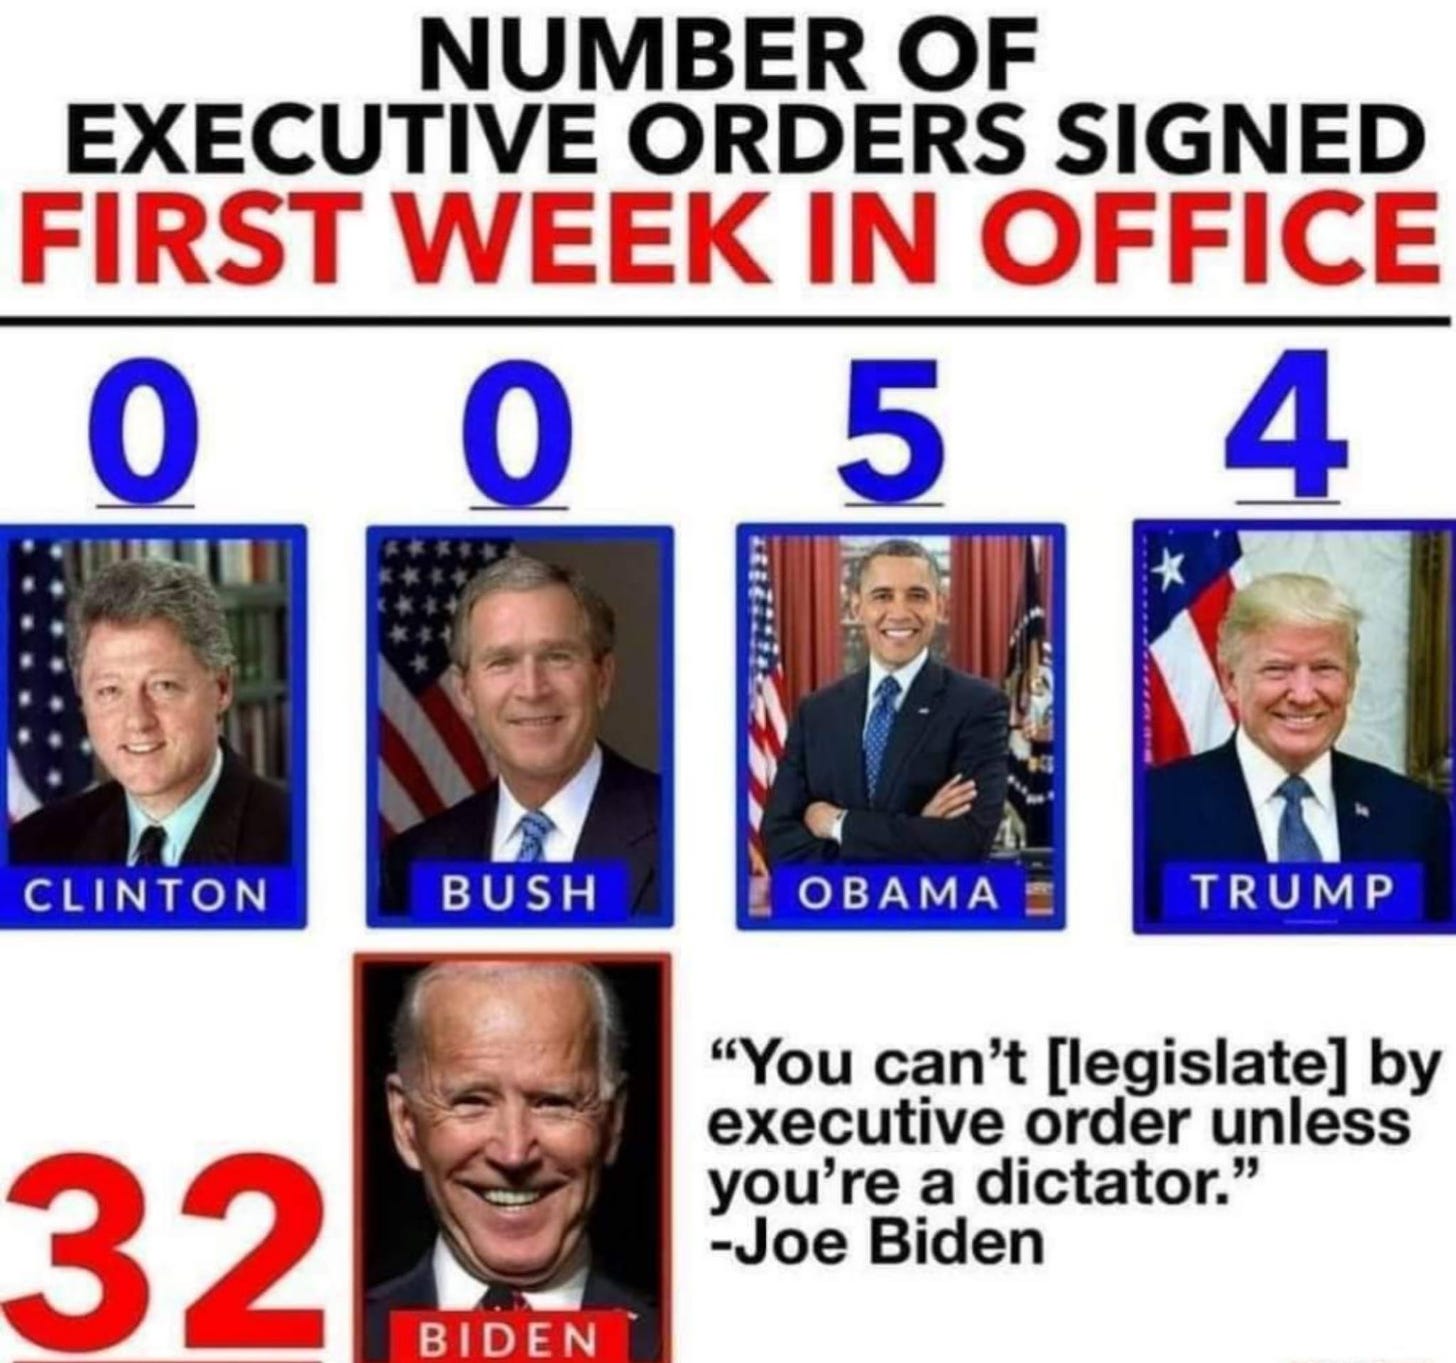 Image may contain: 5 people, text that says 'NUMBER OF EXECUTIVE ORDERS SIGNED FIRST WEEK IN OFFICE 0 5 4 CLINTON BUSH OBAMA TRUMP "You can't [legislate] by executive order unless you're a dictator." -Joe Biden 32 BIDEN'